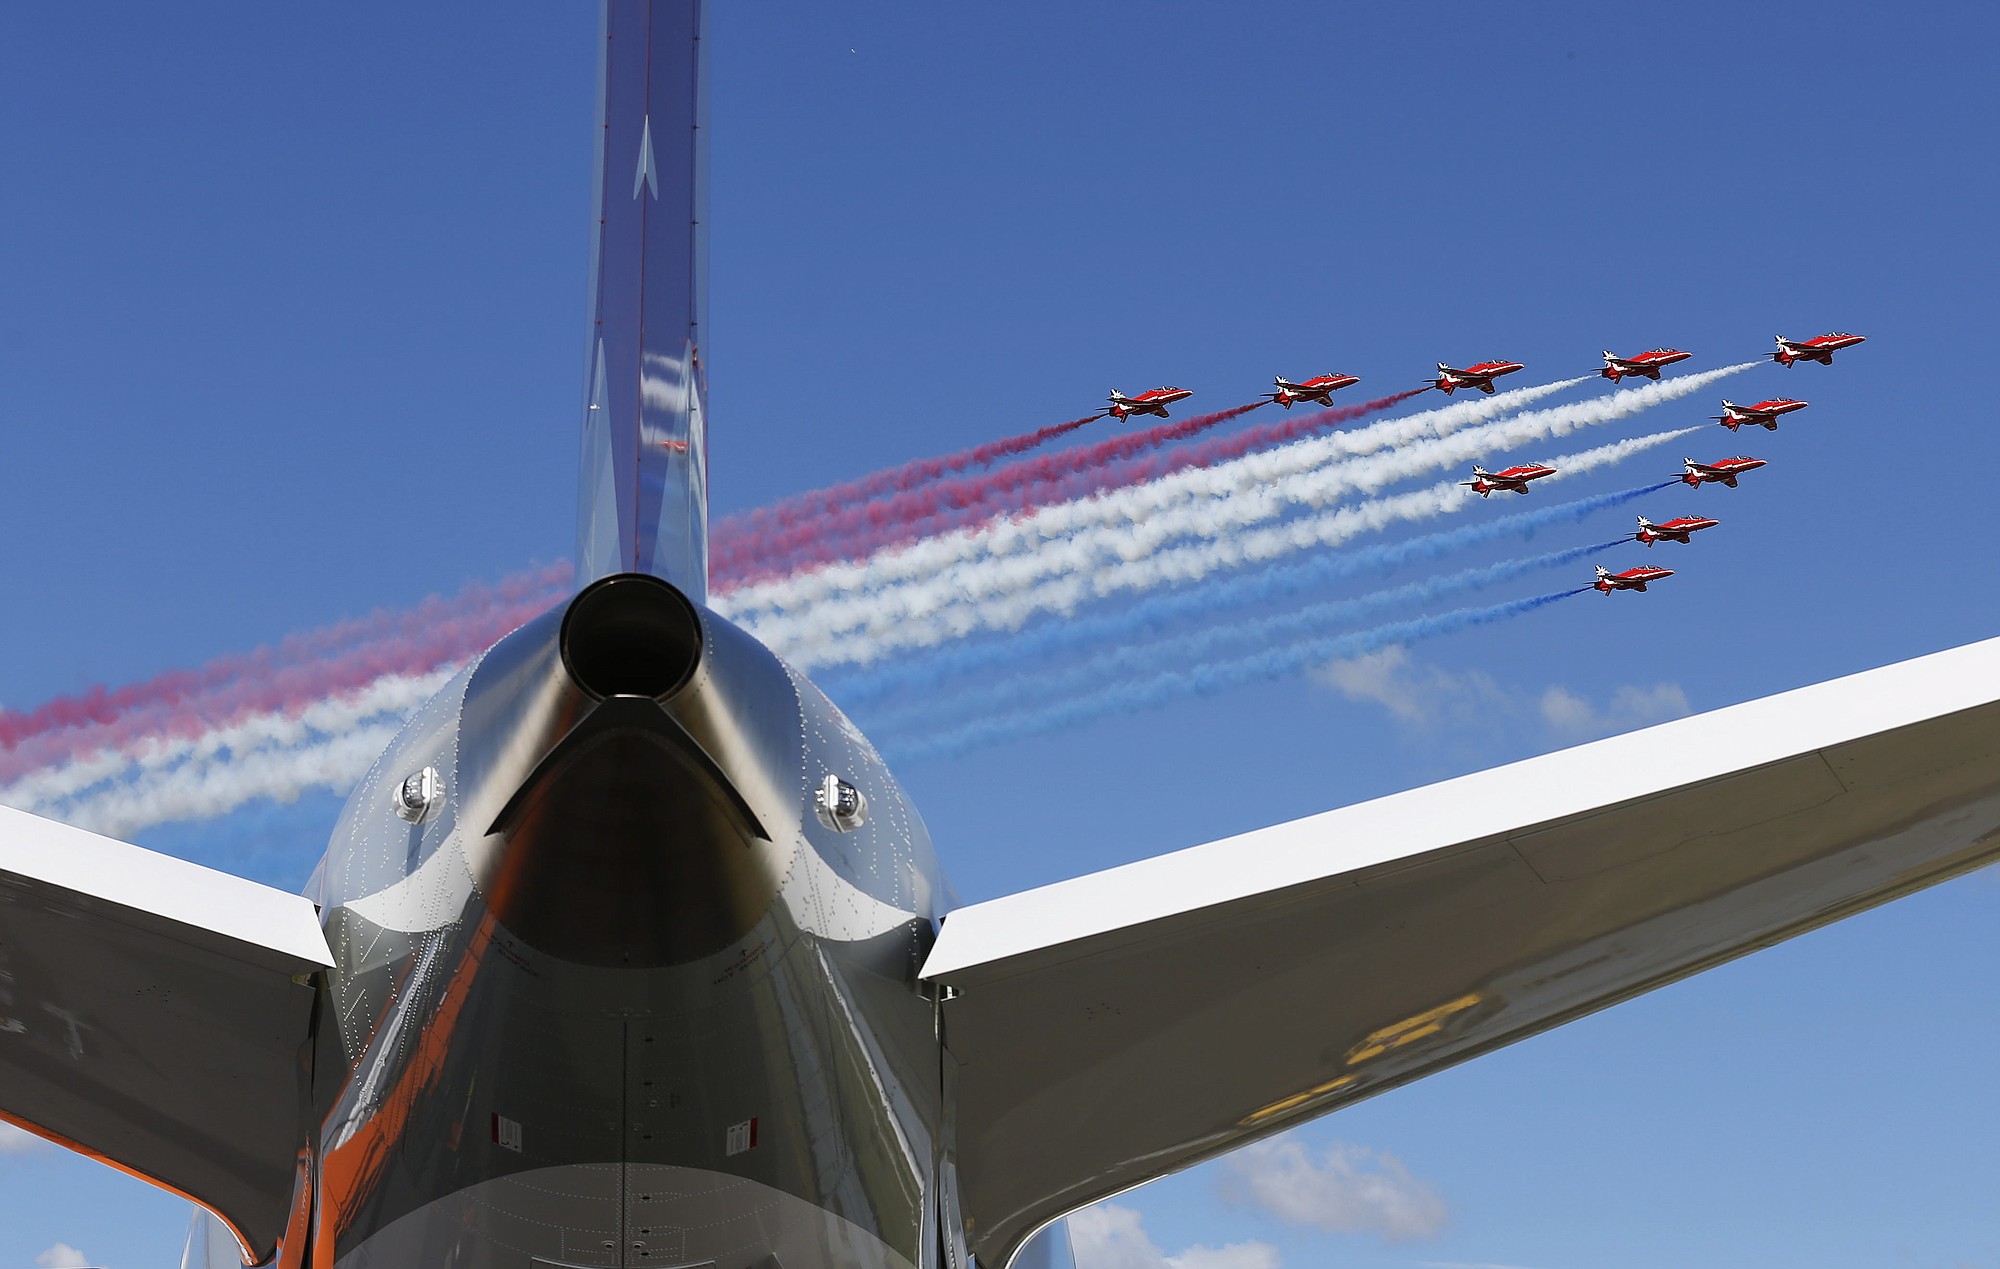 The Royal Air Force Red Arrows aerobatic display team perform a fly past Farnborough Airport on Monday to open the International Air Show, Farnborough, England.